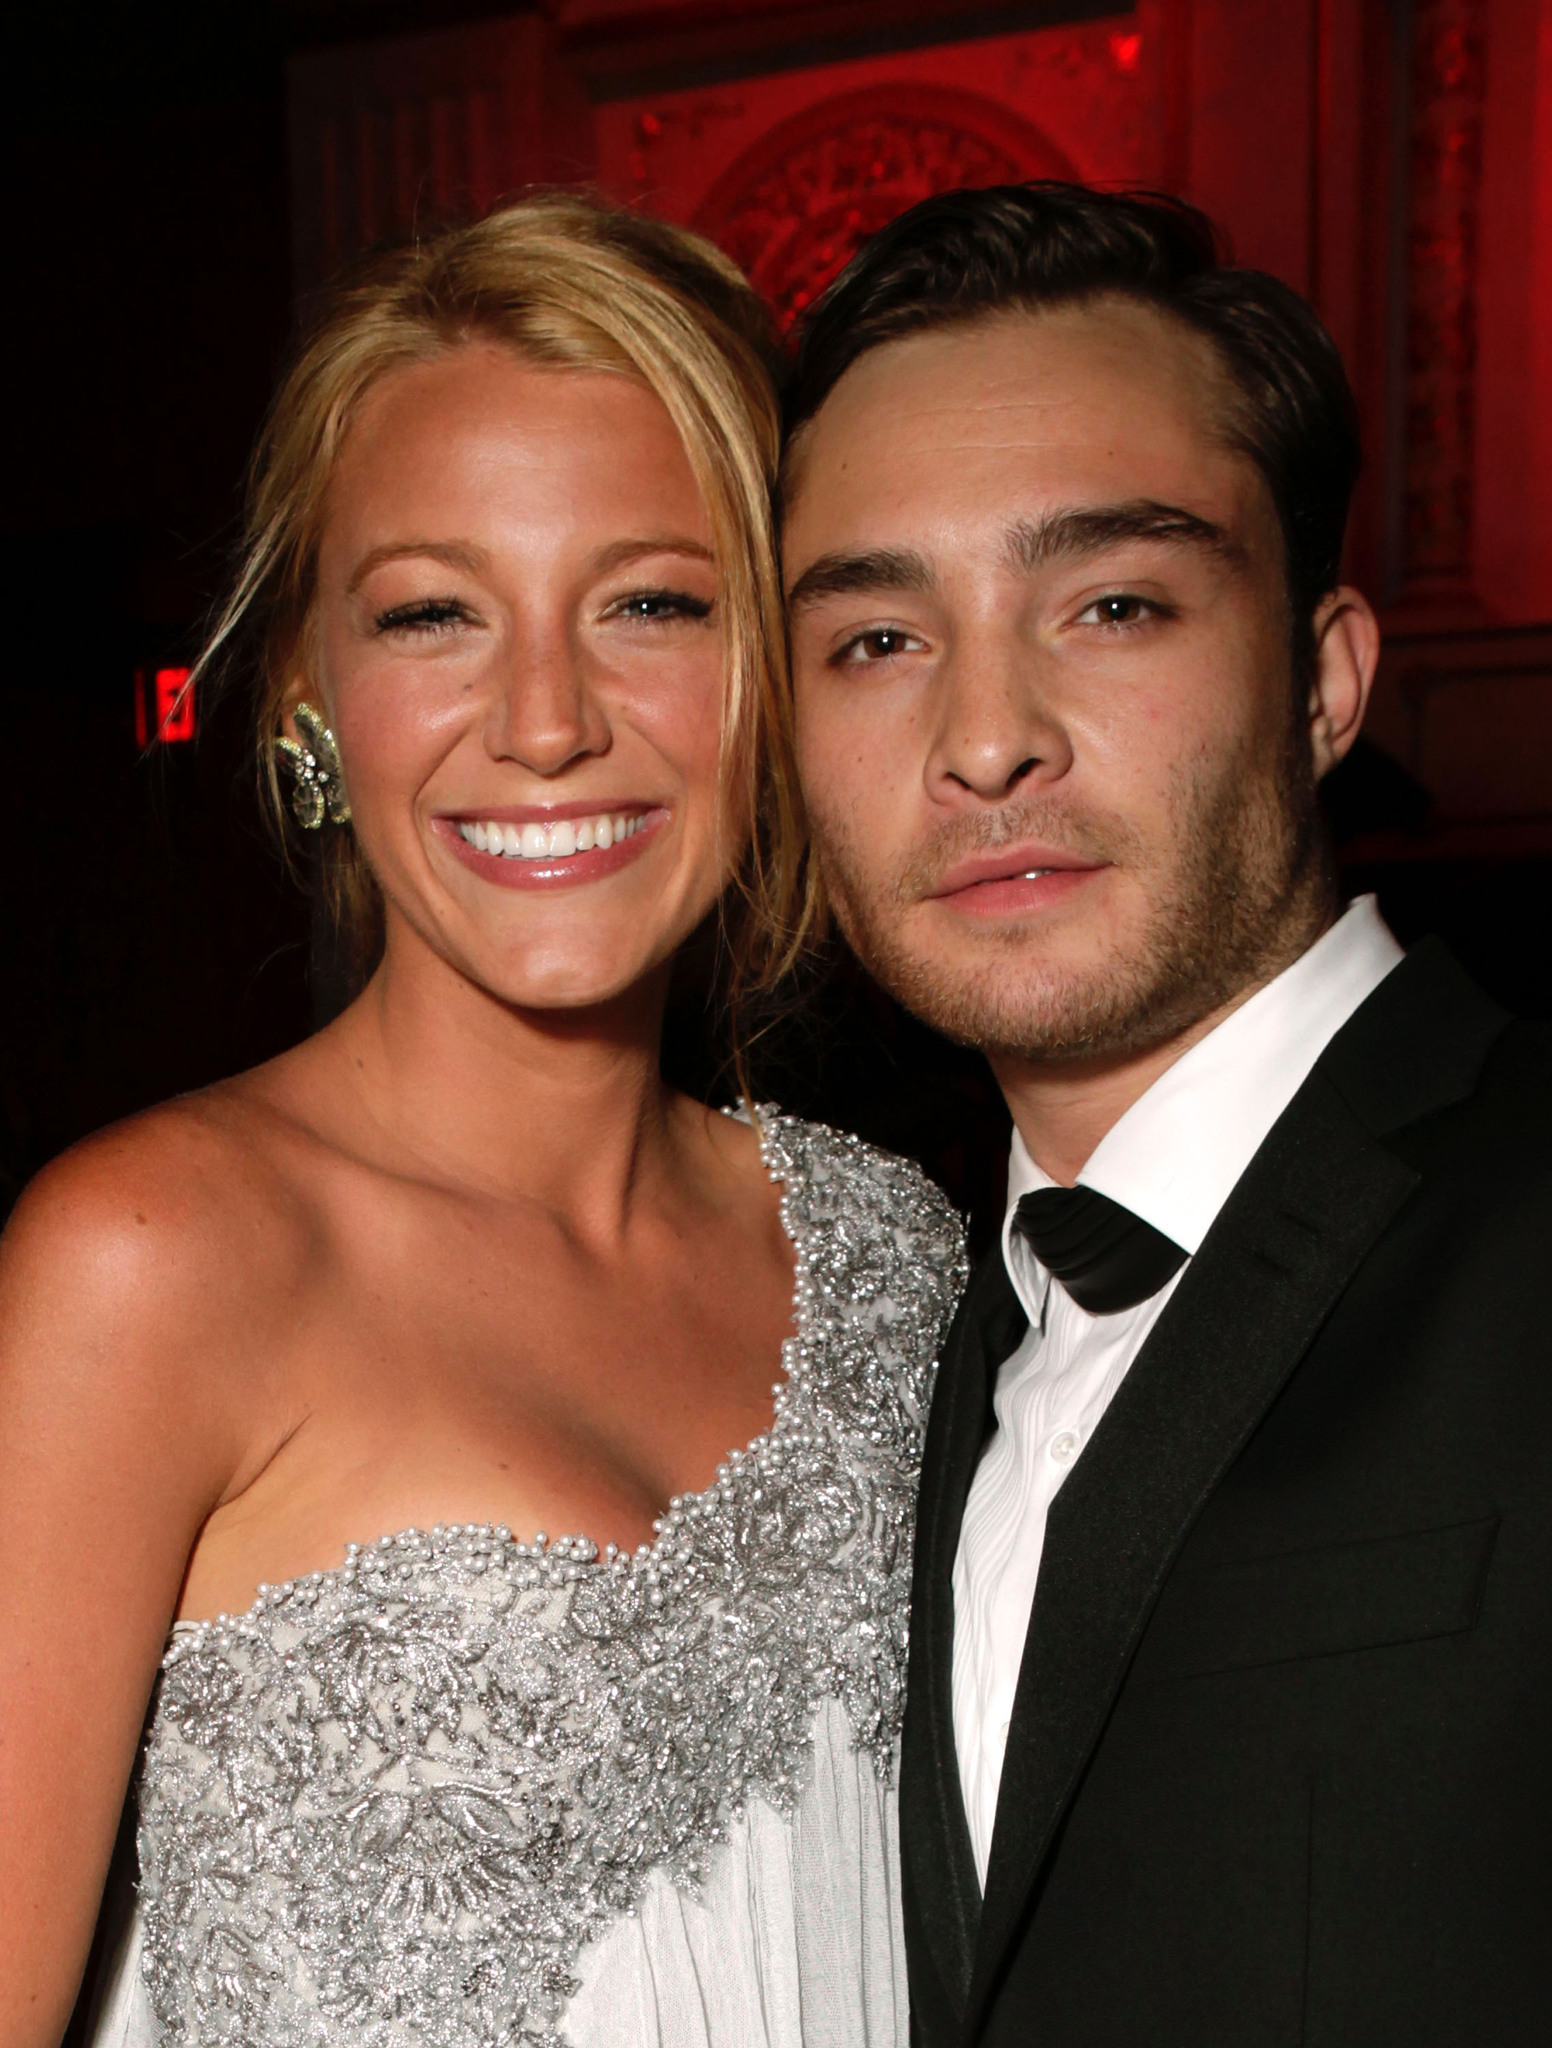 Blake Lively and Ed Westwick